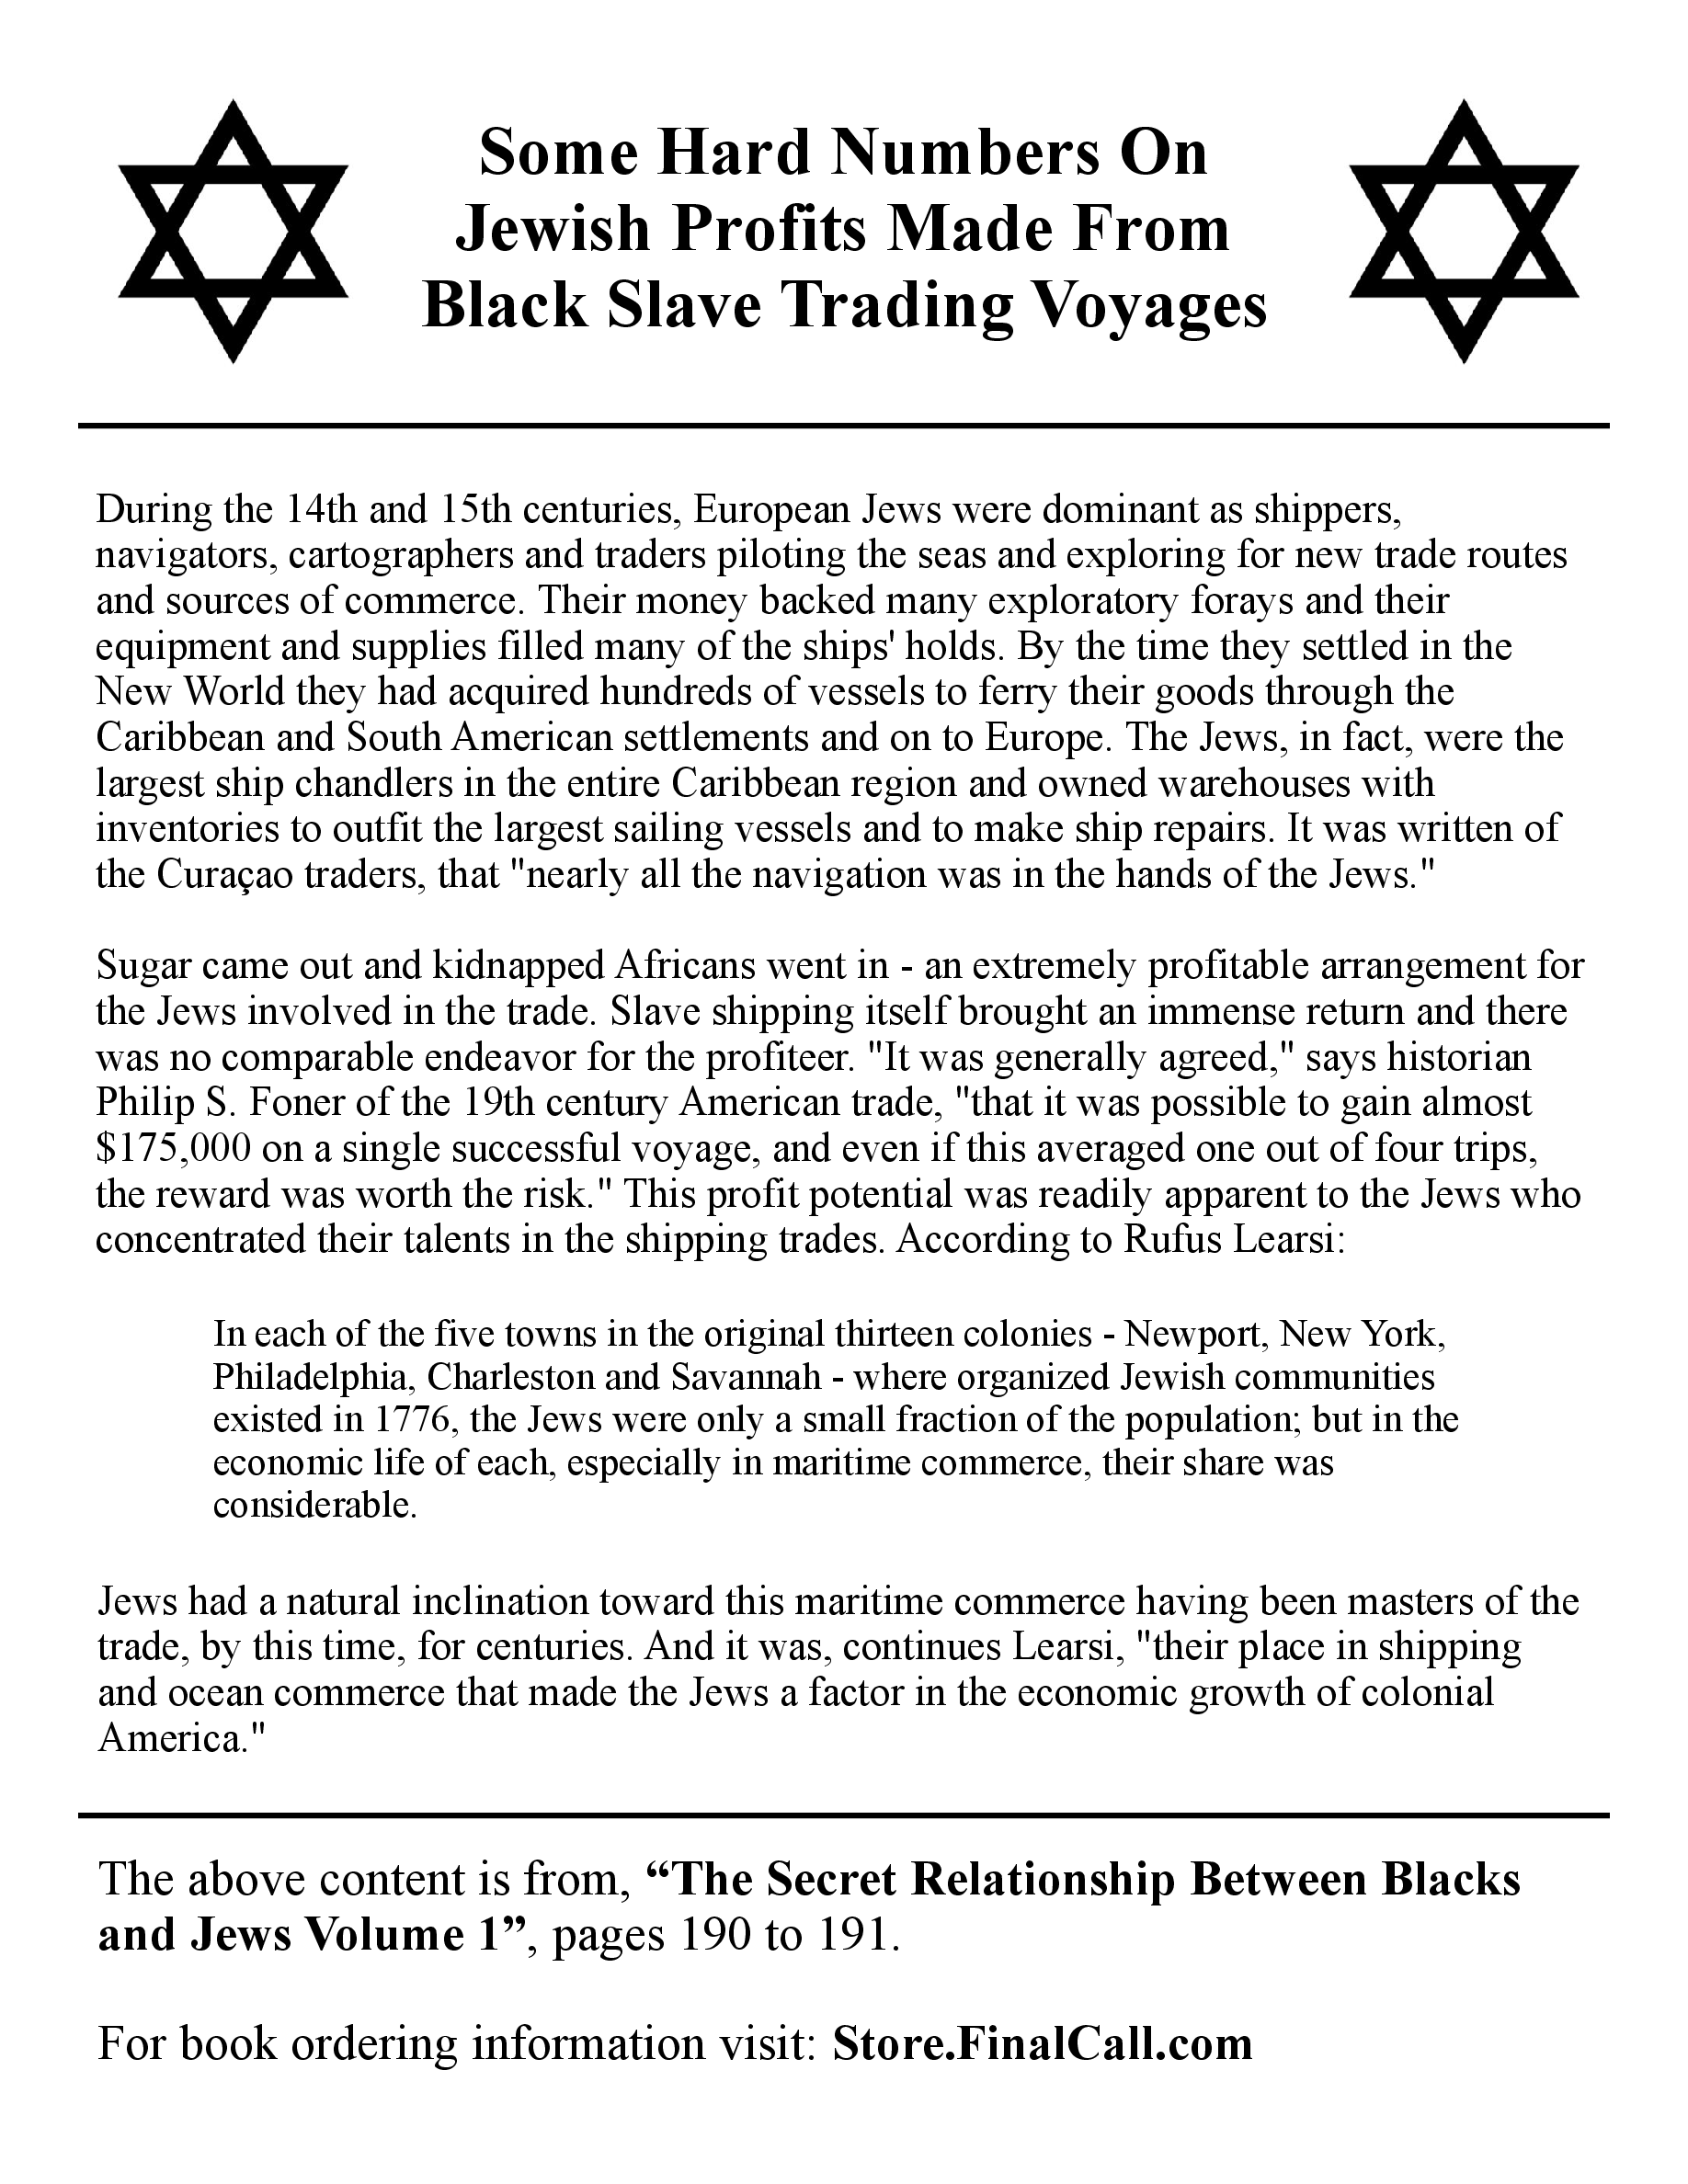 7-Some-Hard-Numbers-On-Jewish-Profits-from-Black-Slave-Trading-Voyages-flier.png